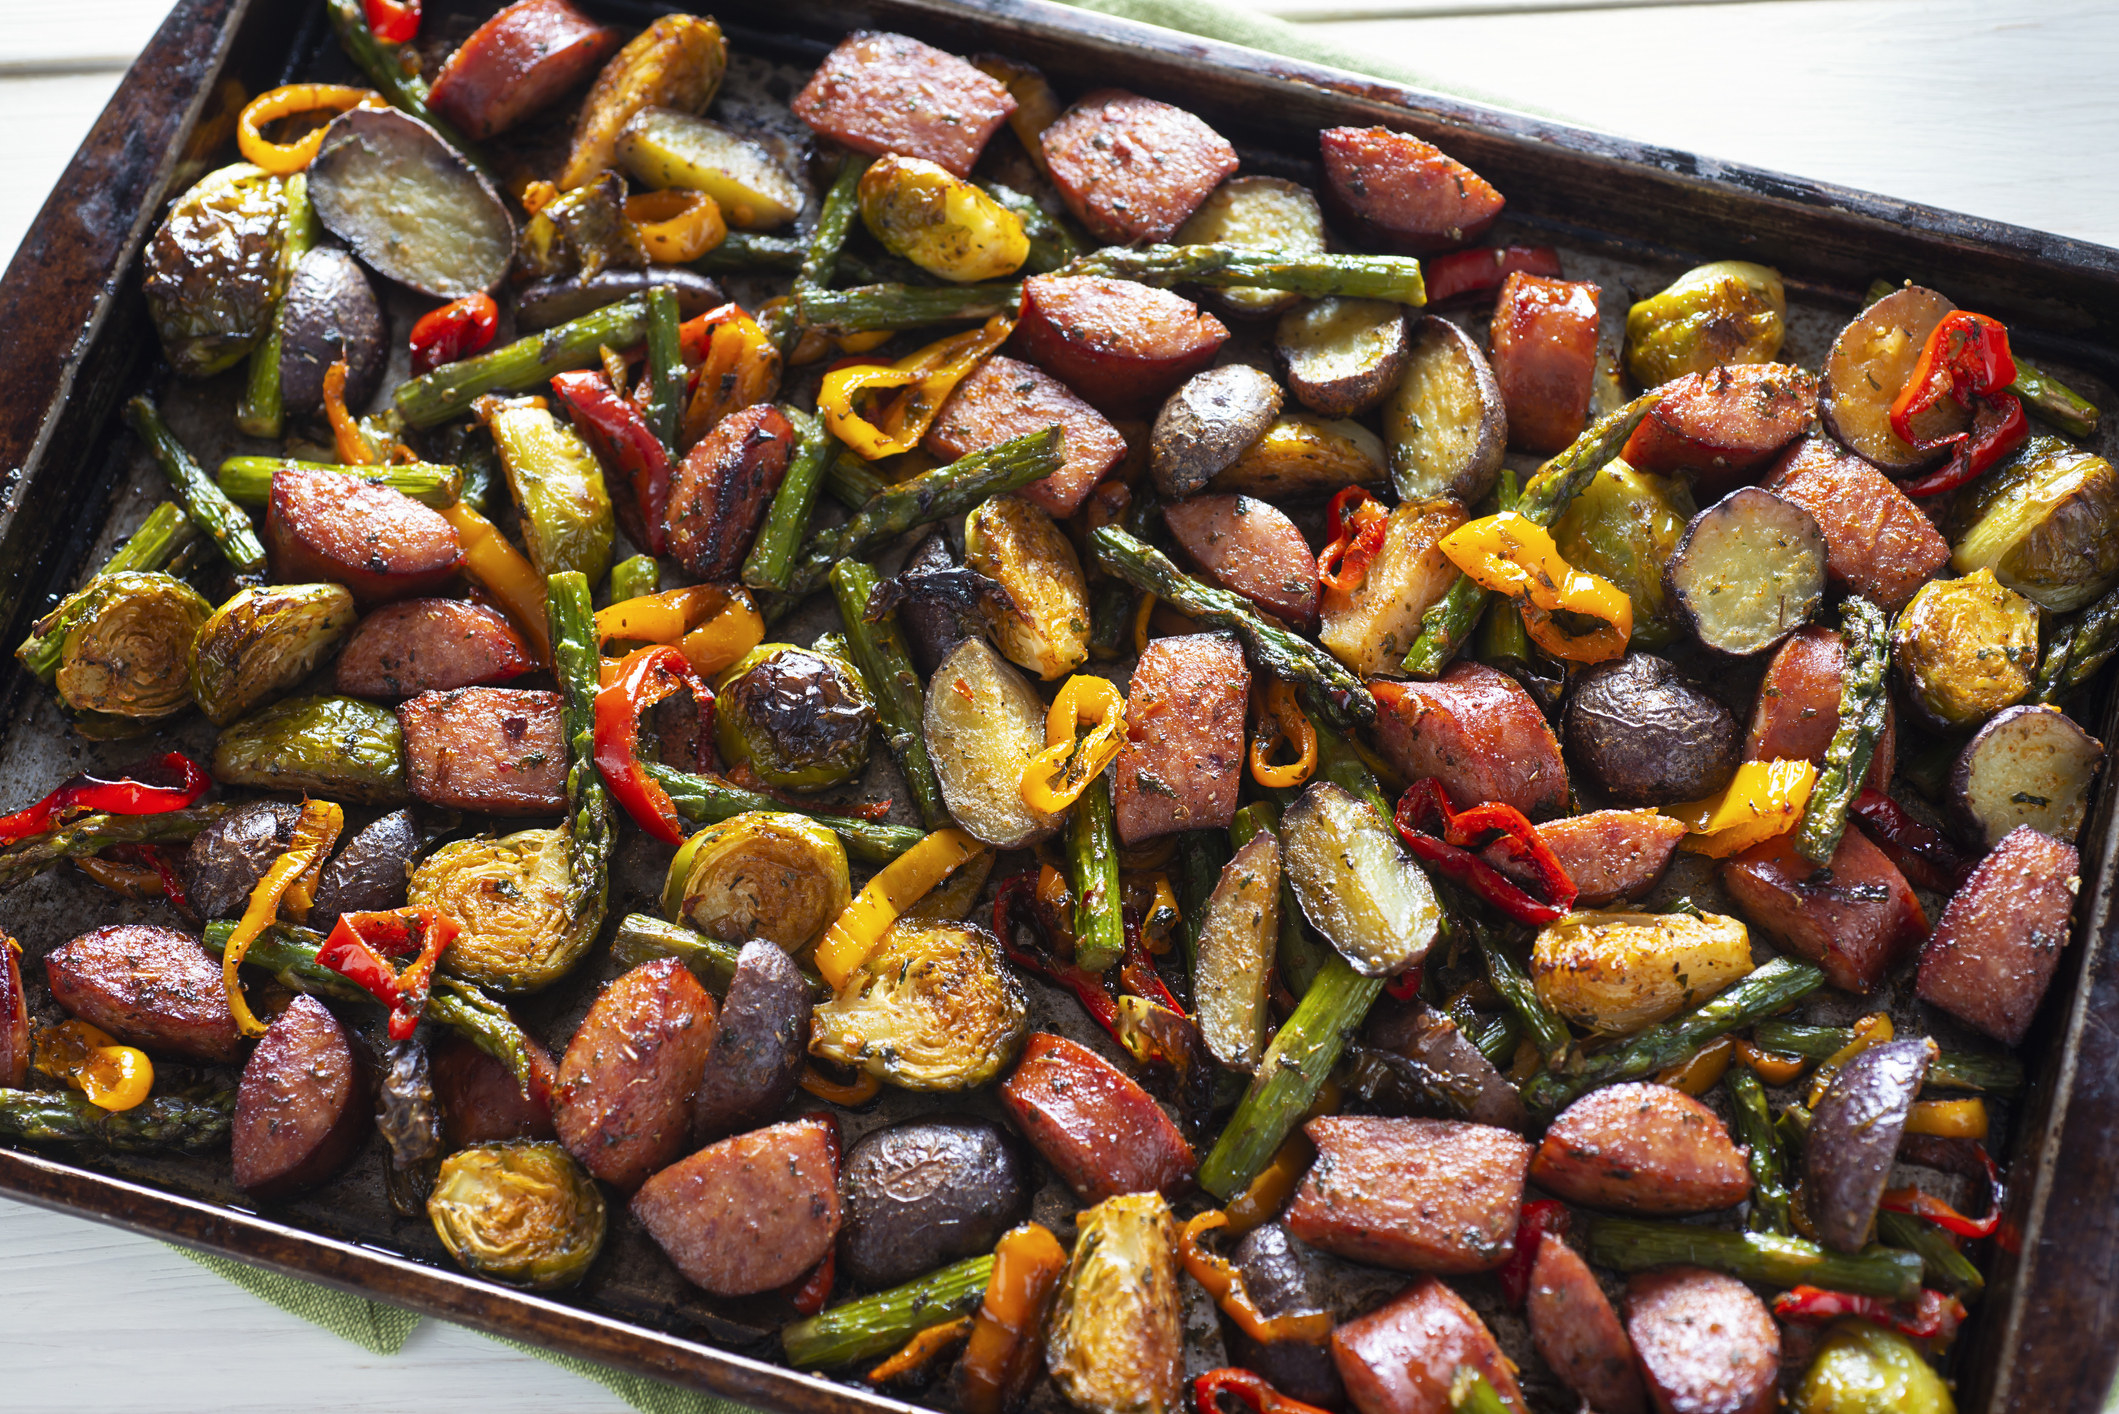 A bunch of roasted vegetables on a baking sheet